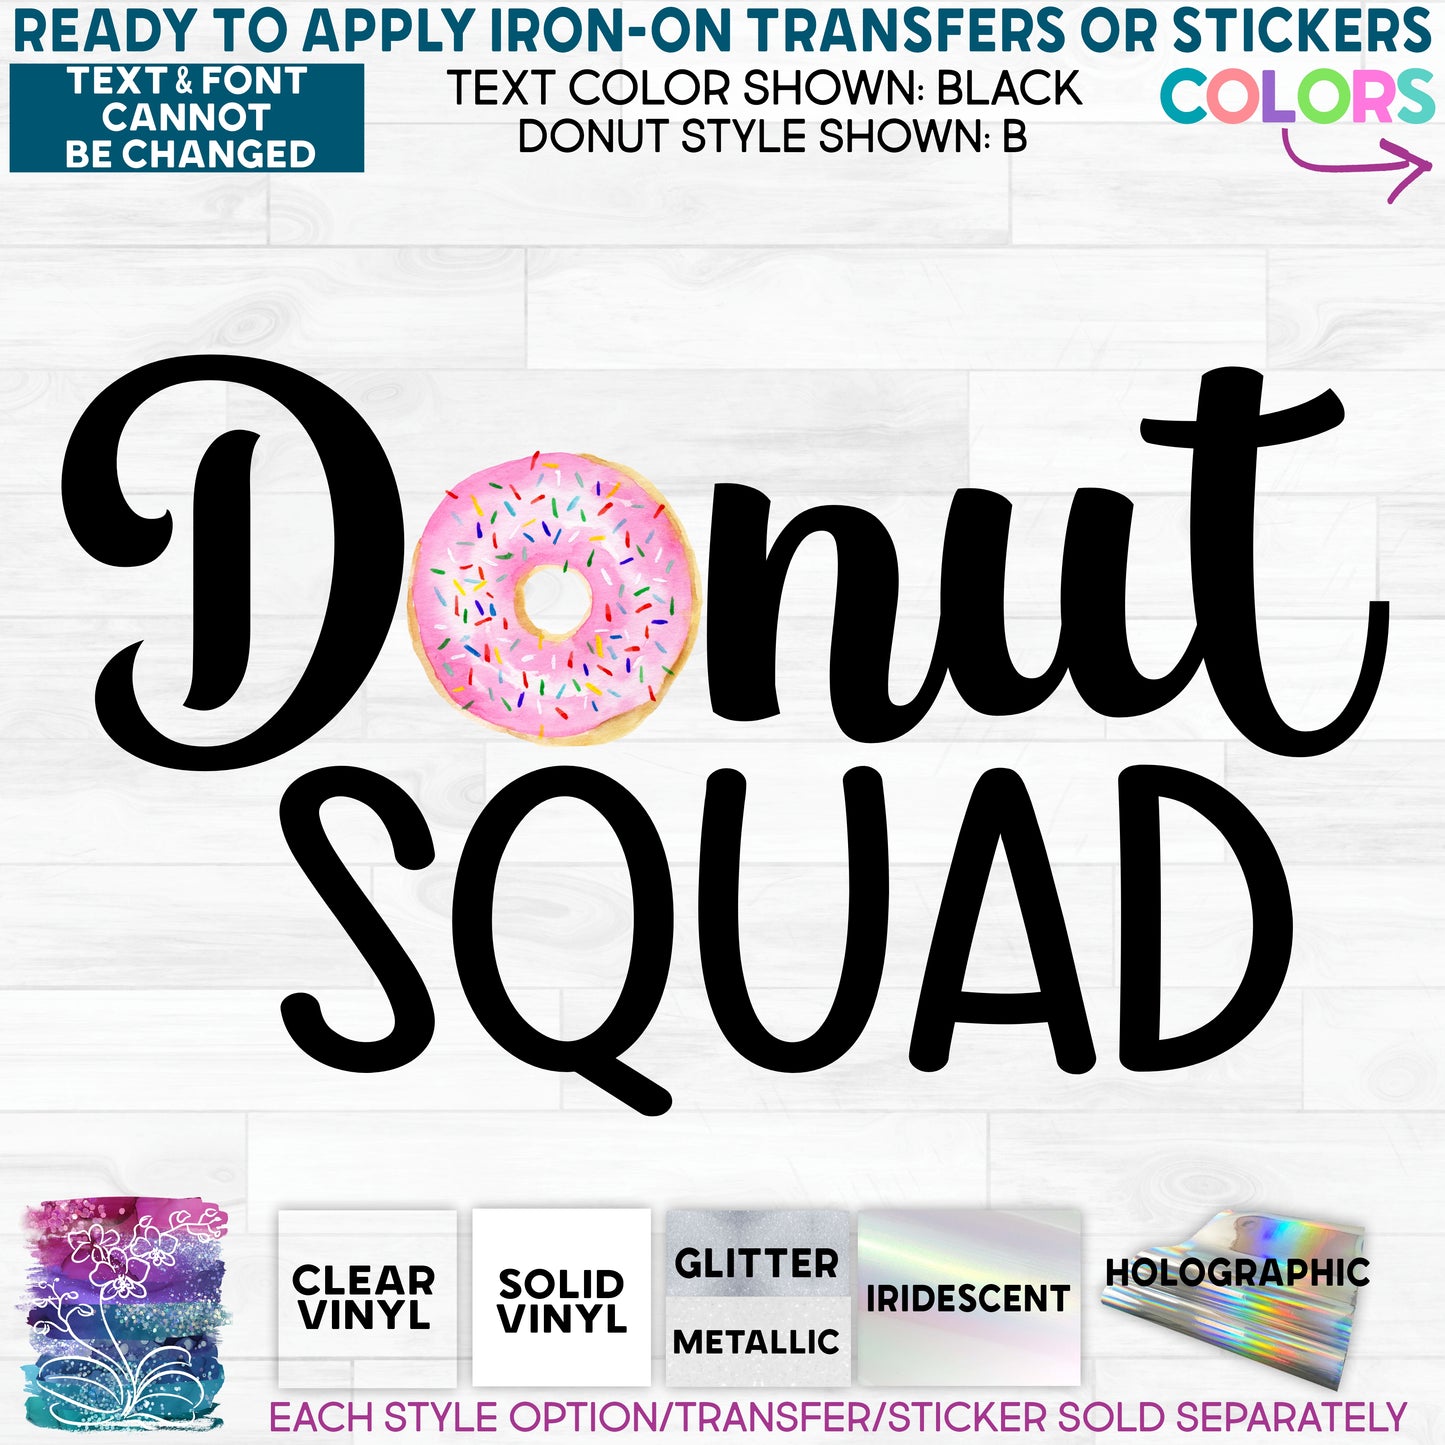 SBS-242-9B Donut Squad Watercolor More Styles Available! Custom Printed Iron On Transfer or Sticker